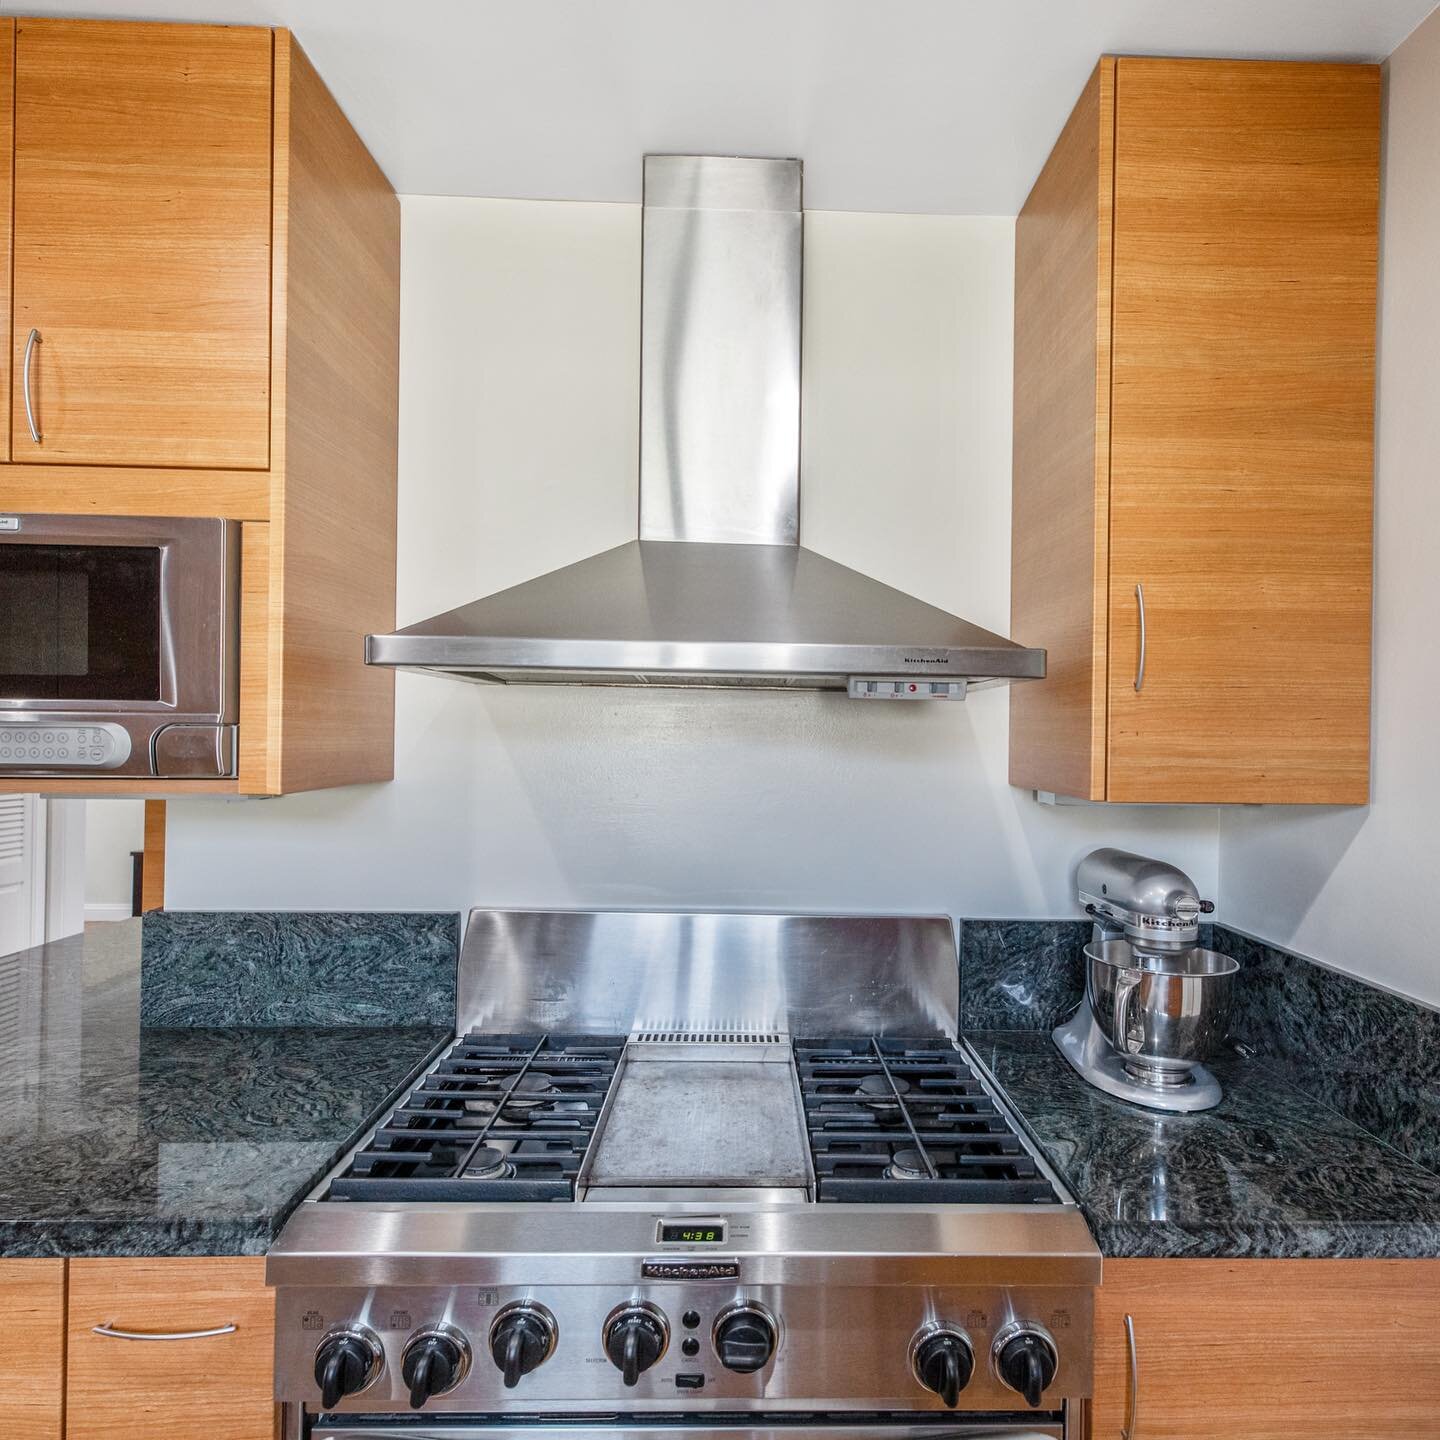 We&rsquo;re OBSESSED with the kitchen at our new listing at 6010 E. Marita, Long Beach!🌟
The gorgeous wood tones, clean lines, and high-end stainless appliances make this kitchen as beautiful as it is functional. With TONS of cabinet and counter spa